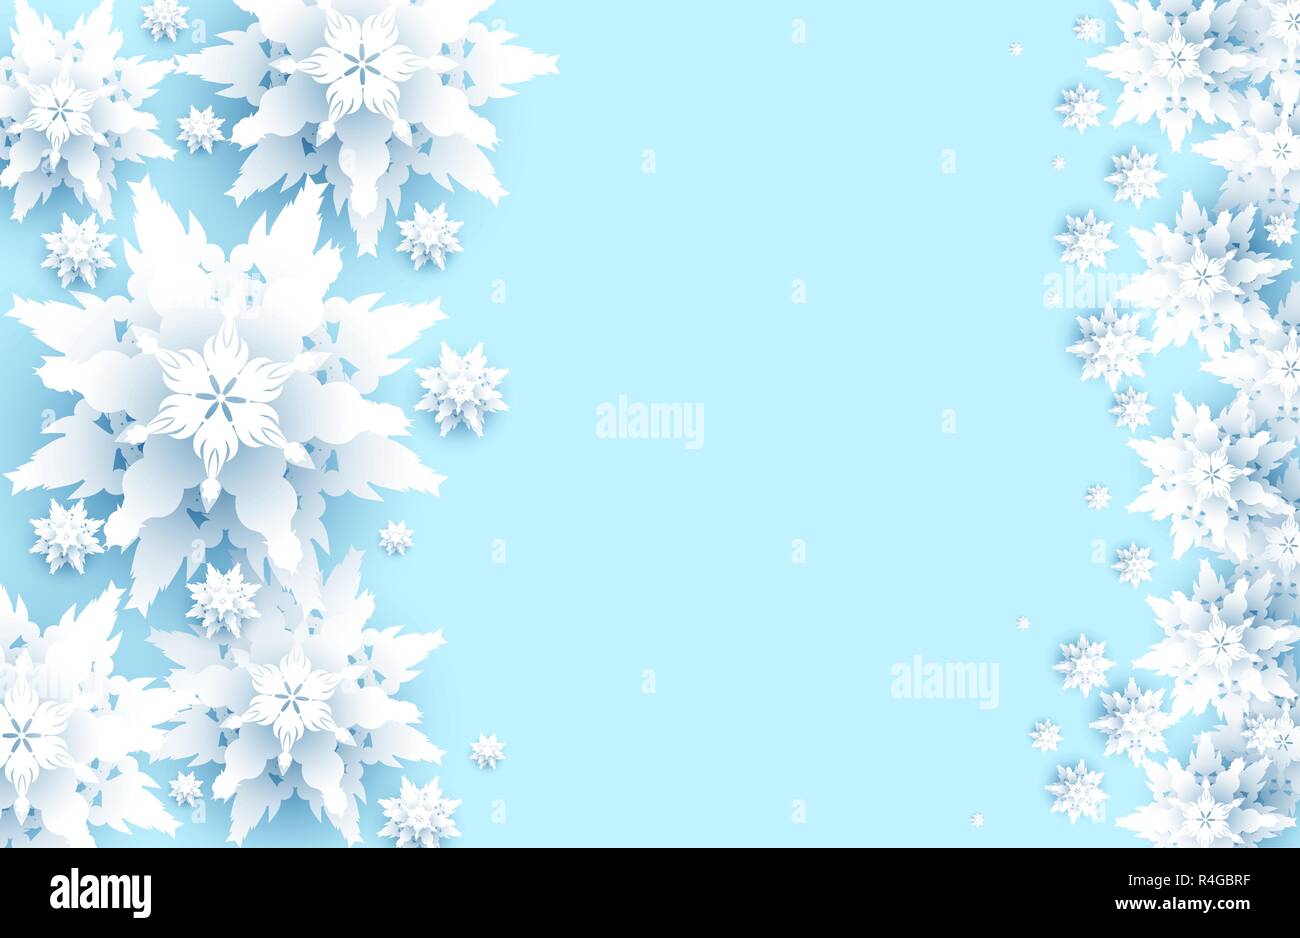 Blue realistic paper cut snowflakes Stock Vector